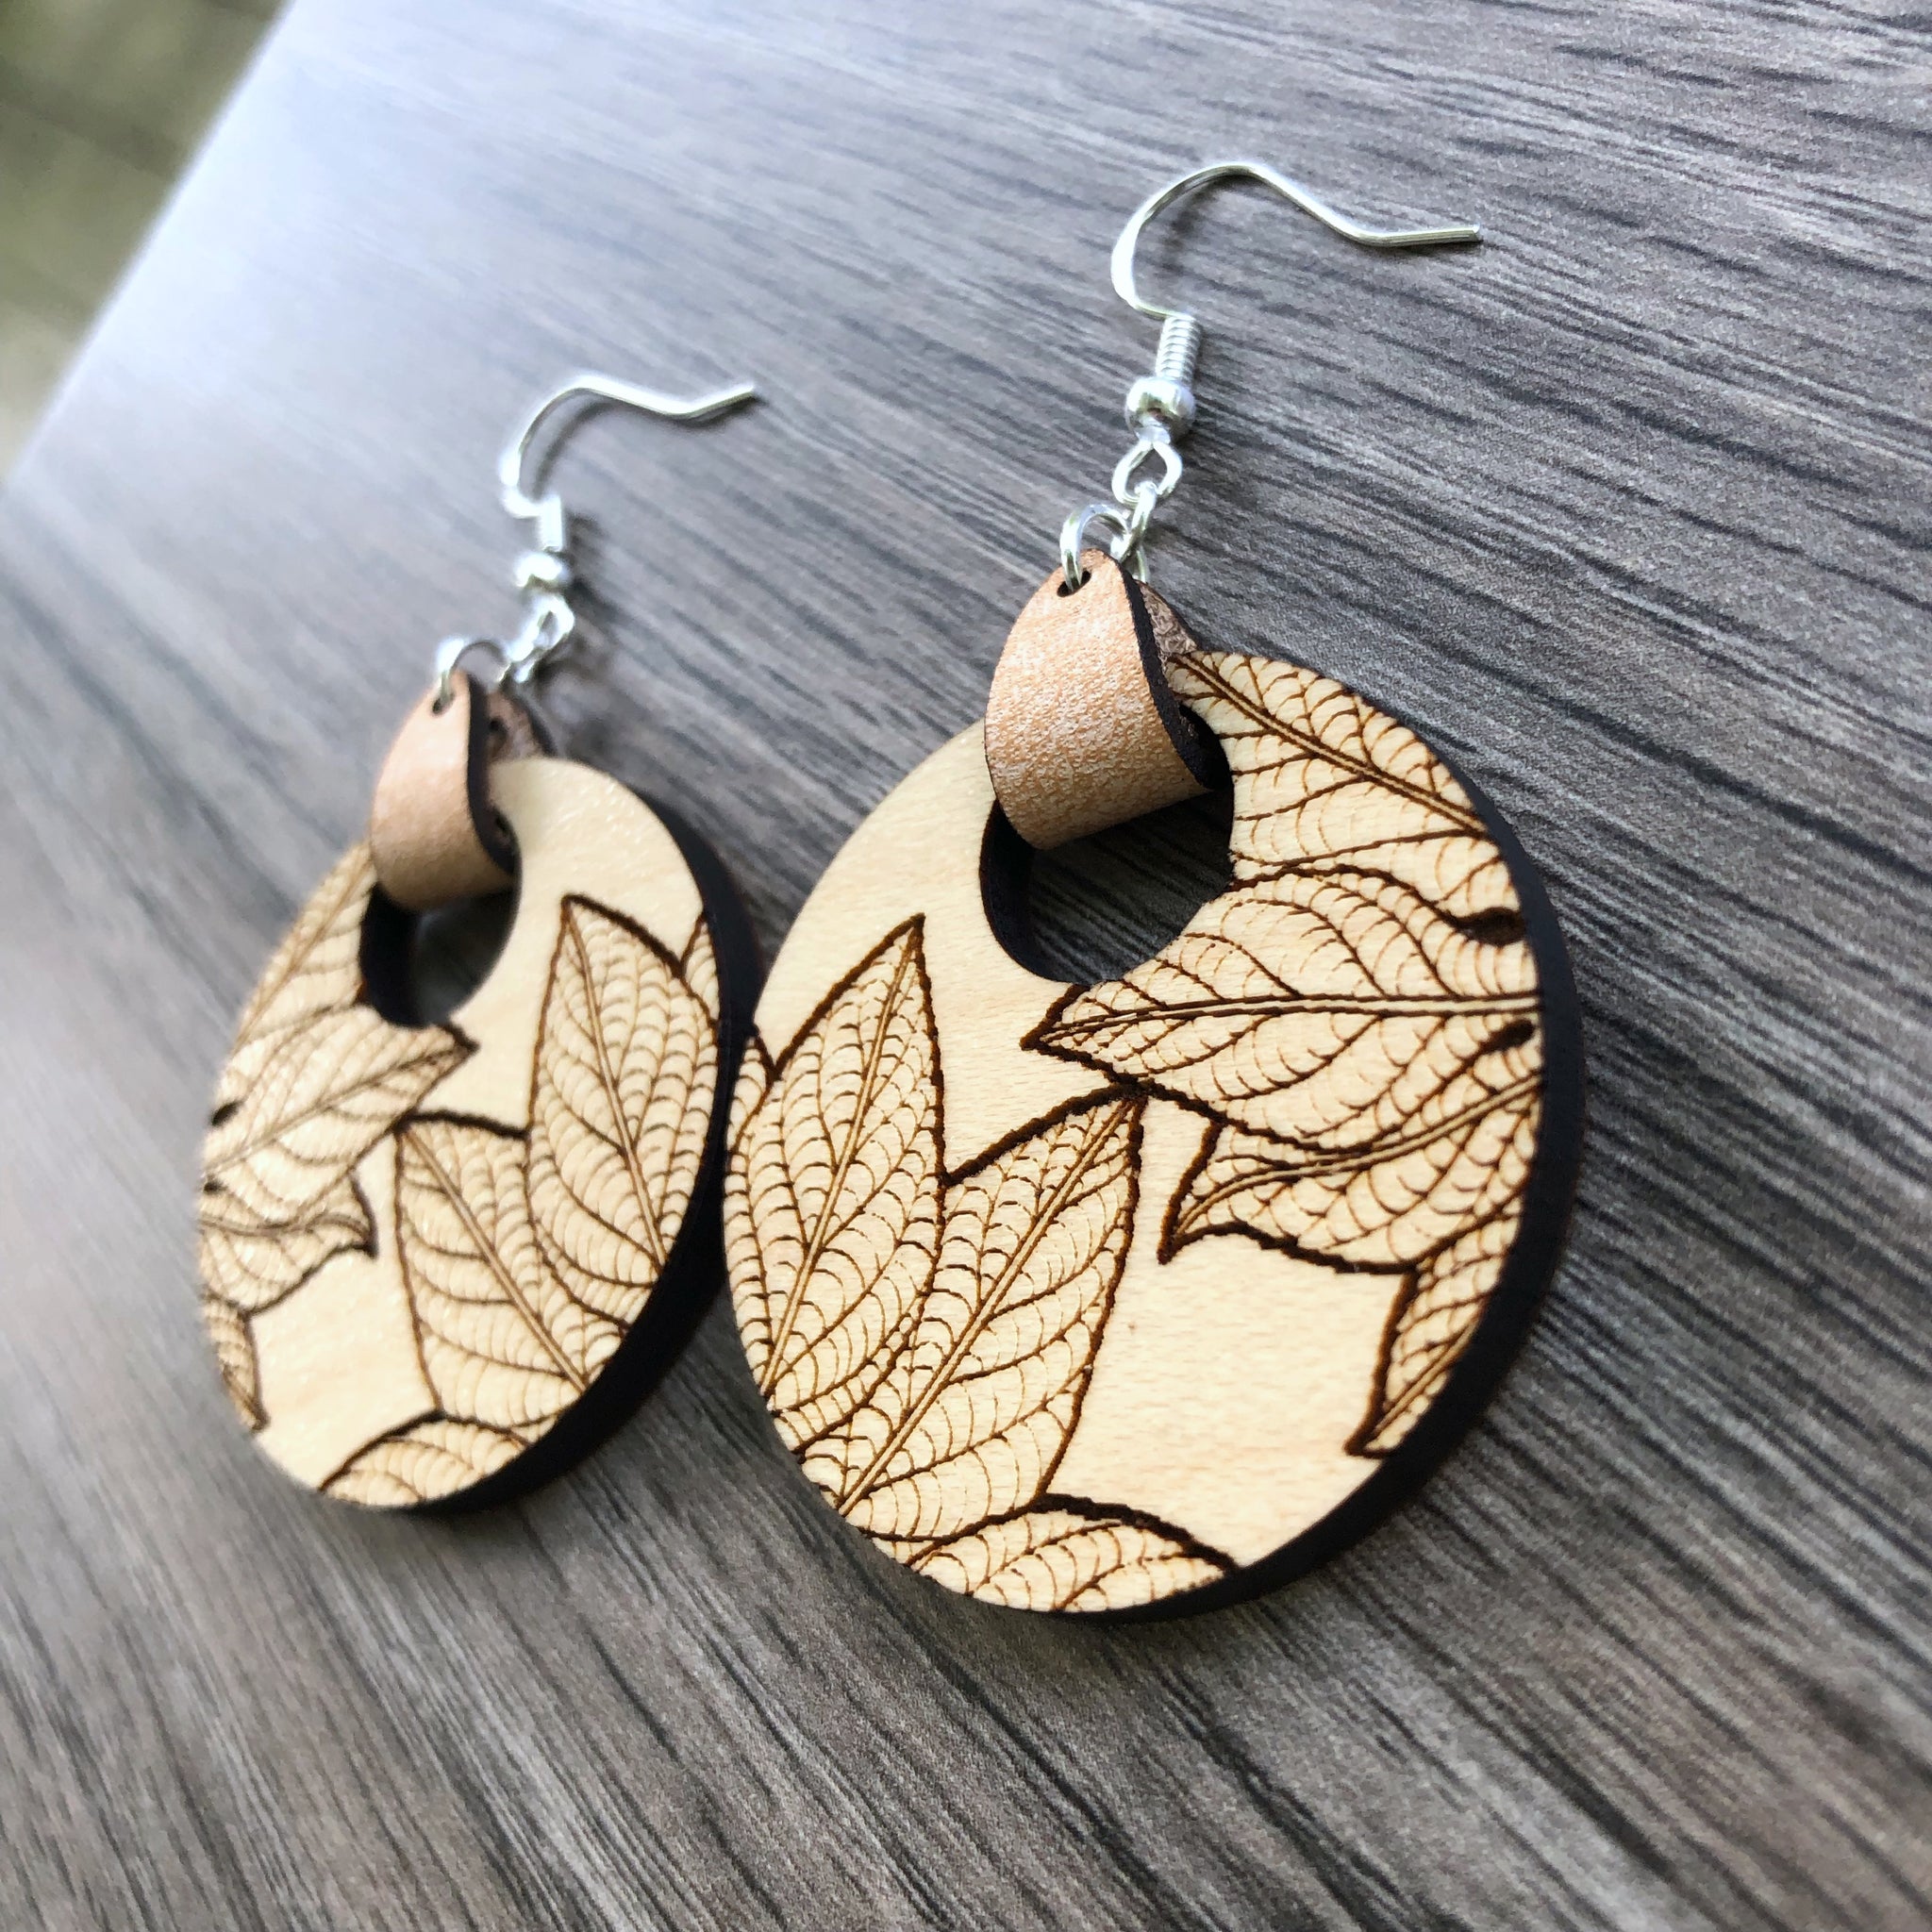 Joanna Gaines-Inspired Faux Leather Leaf Earrings - Jolly & Happy